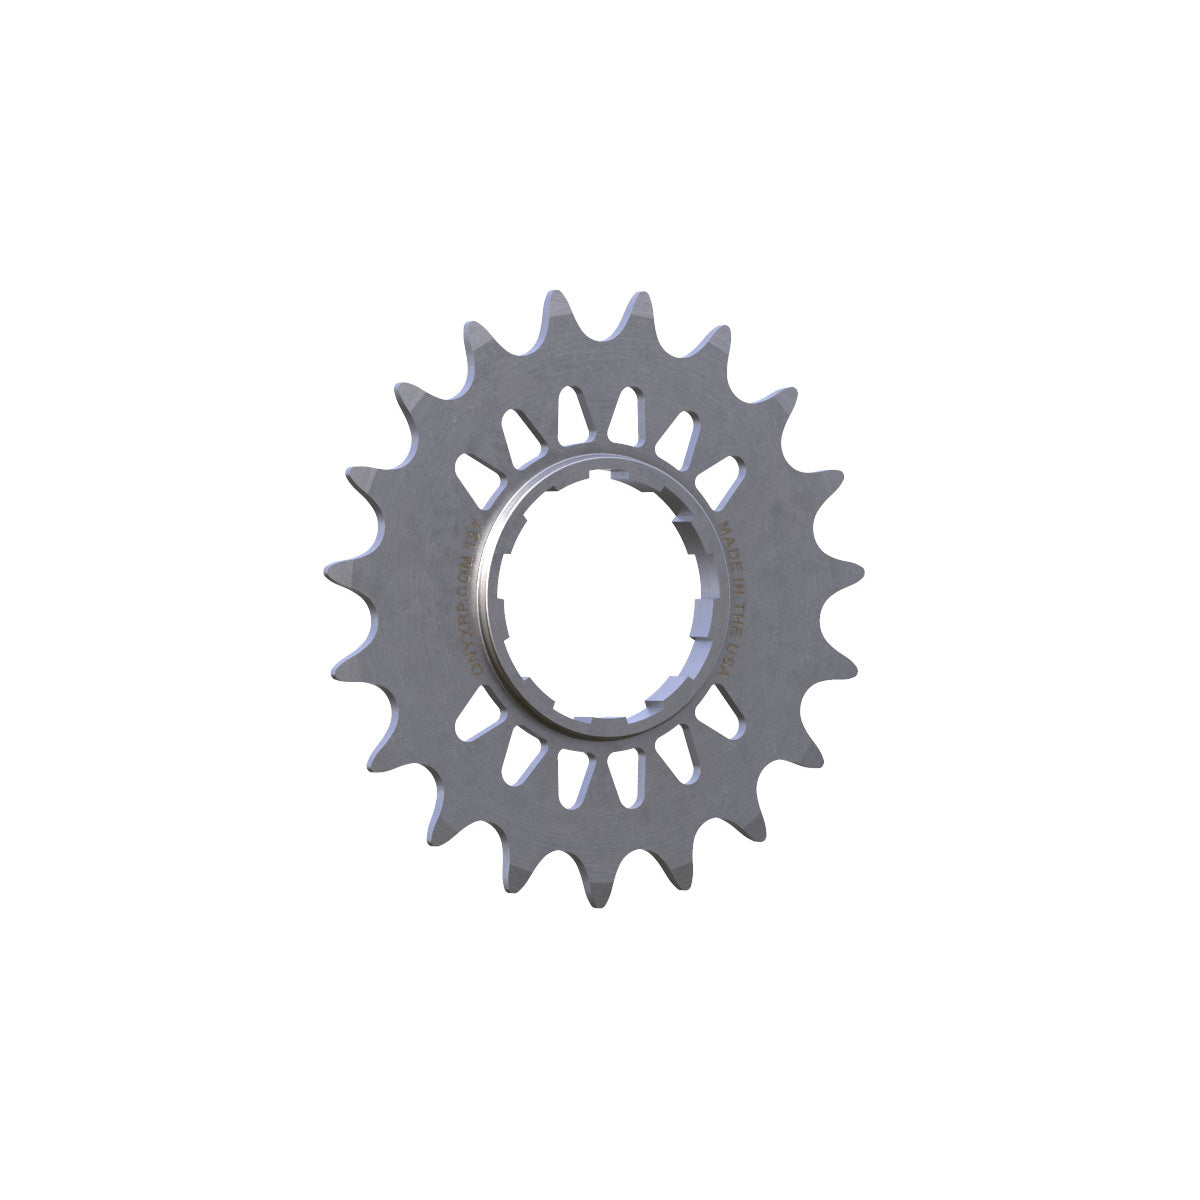 Onyx Racing 19t Stainless Steel Cog for BMX Cassette hubs - 3/32"